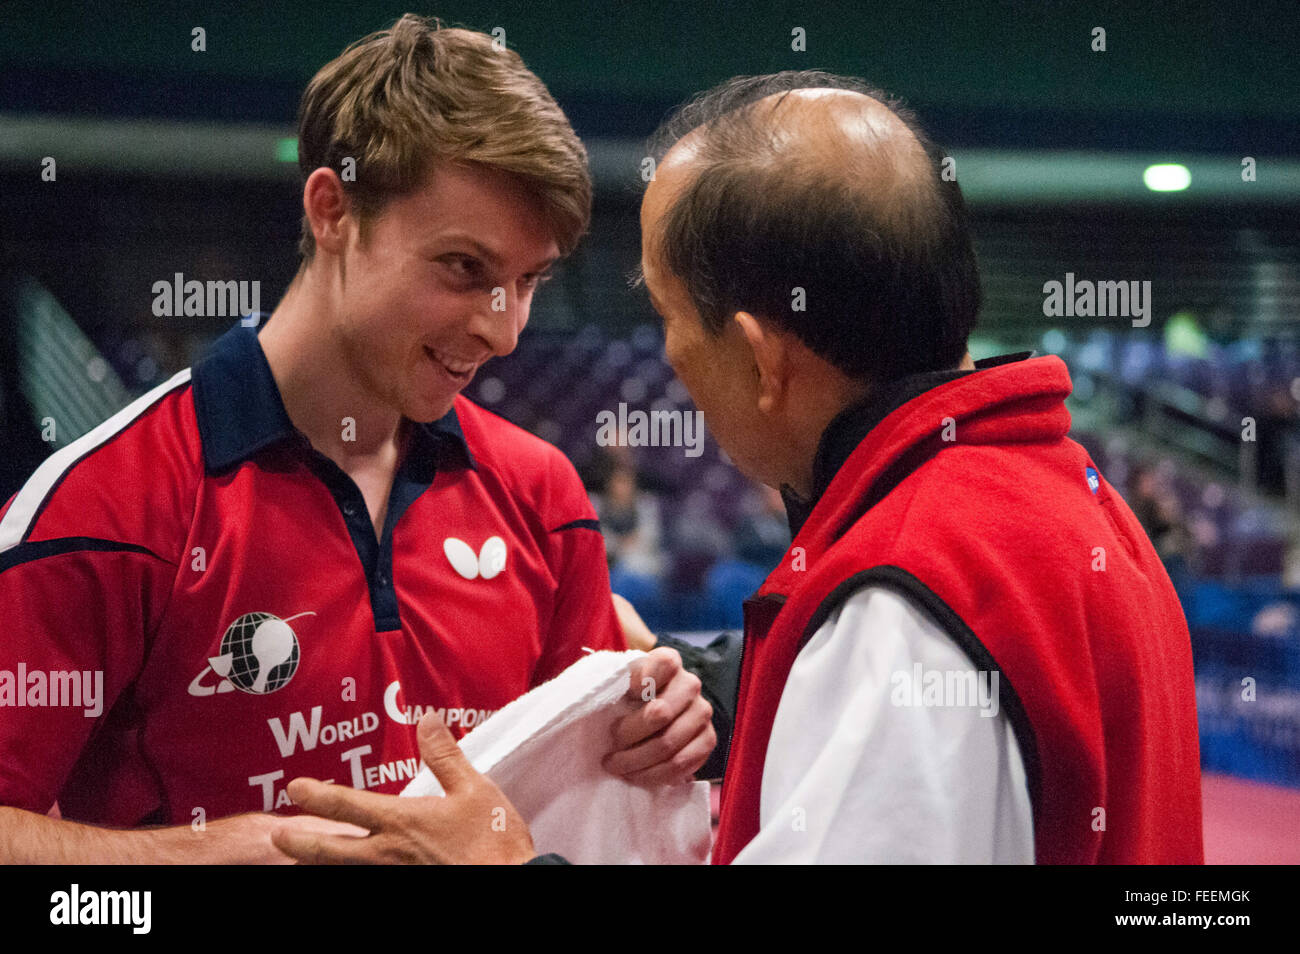 Greensboro, North Carolina, US. 5th Feb, 2016. Feb. 5, 2016 - Greensboro, N.C., USA - MICHAEL LANDERS listens to his coach, LI ZHEN SHI, during a timeout in his men's quarterfinals match against Jack Wang on the second day of the 2016 U.S. Olympic Table Tennis Trials. Landers defeated Wang to advance to the semi-finals. The top three men and women from the trials move on to compete in April at the 2016 North America Olympic Qualification tournament in Ontario, Canada. The 2016 Summer Olympics will be held in Rio De Janeiro, Brazil, Aug. 5-21. © Timothy L. Hale/ZUMA Wire/Alamy Live News Stock Photo